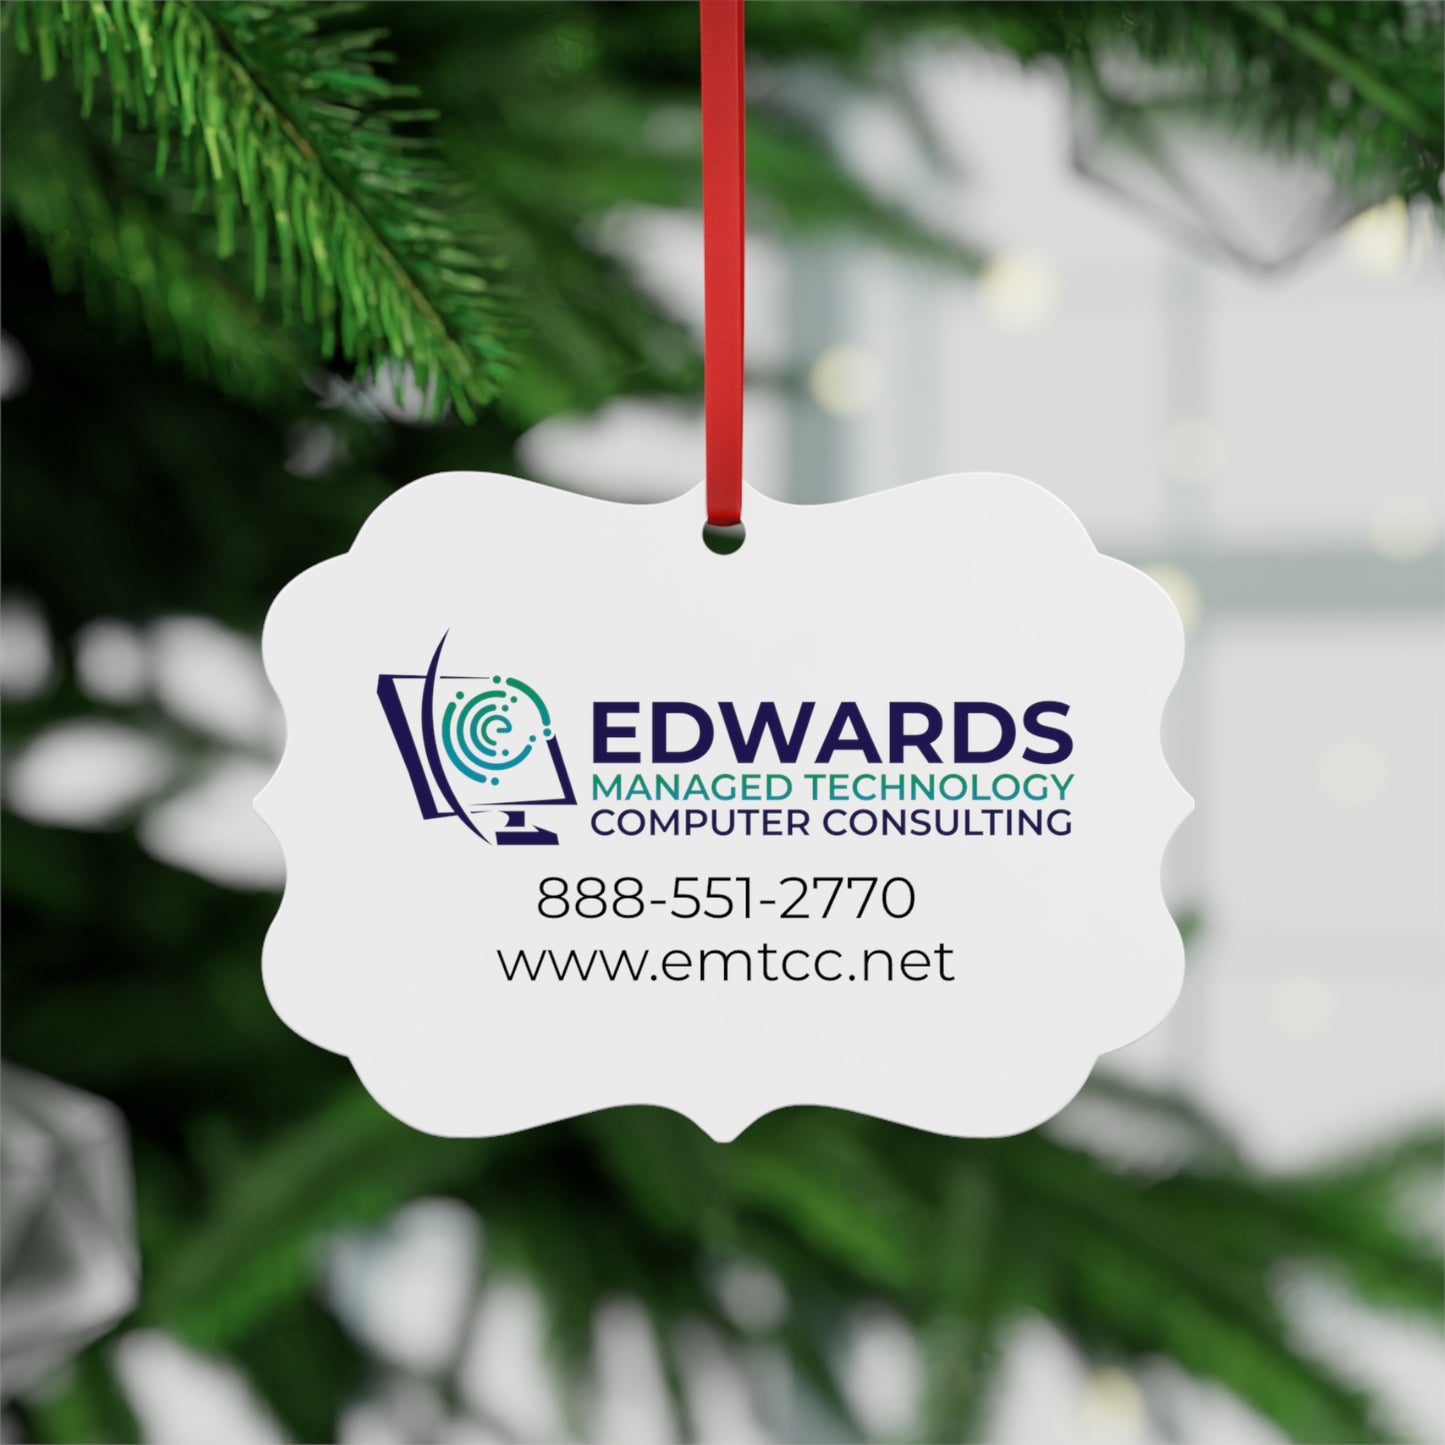 Edwards Managed Technology Metal Plaque Ornament